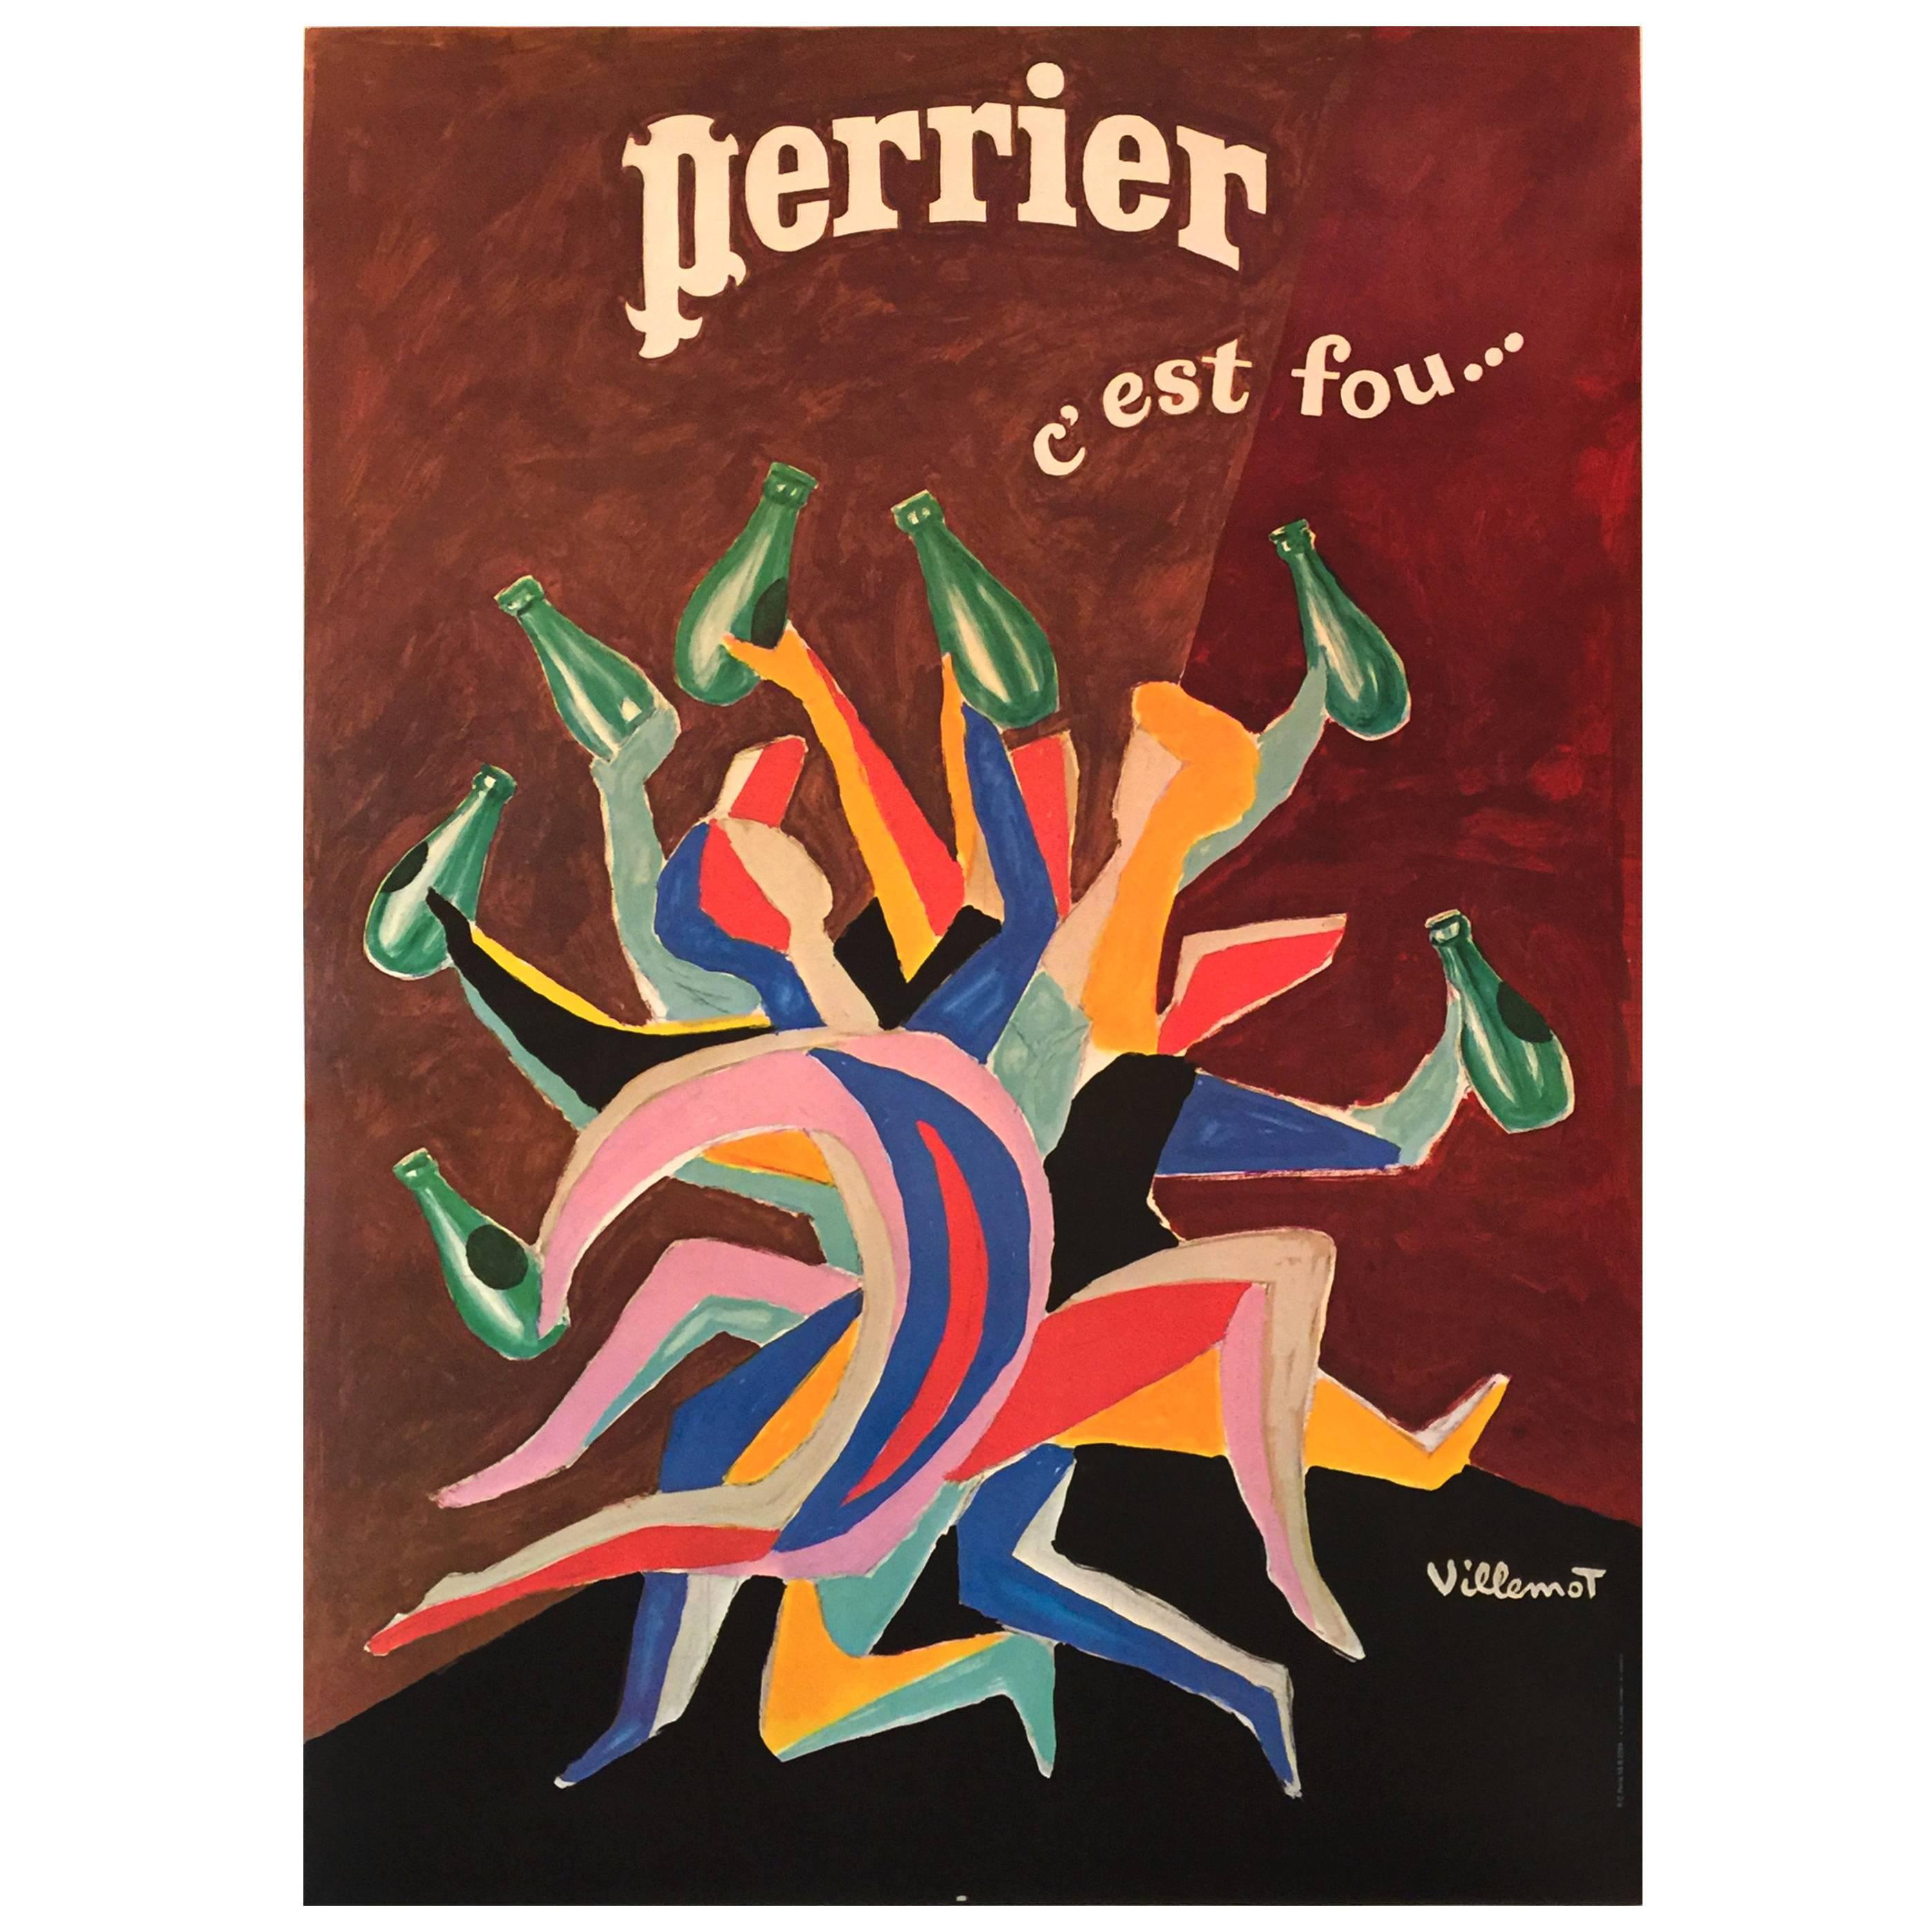 French Modern Period New Wave Style Perrier Advertising Poster by Villemot For Sale